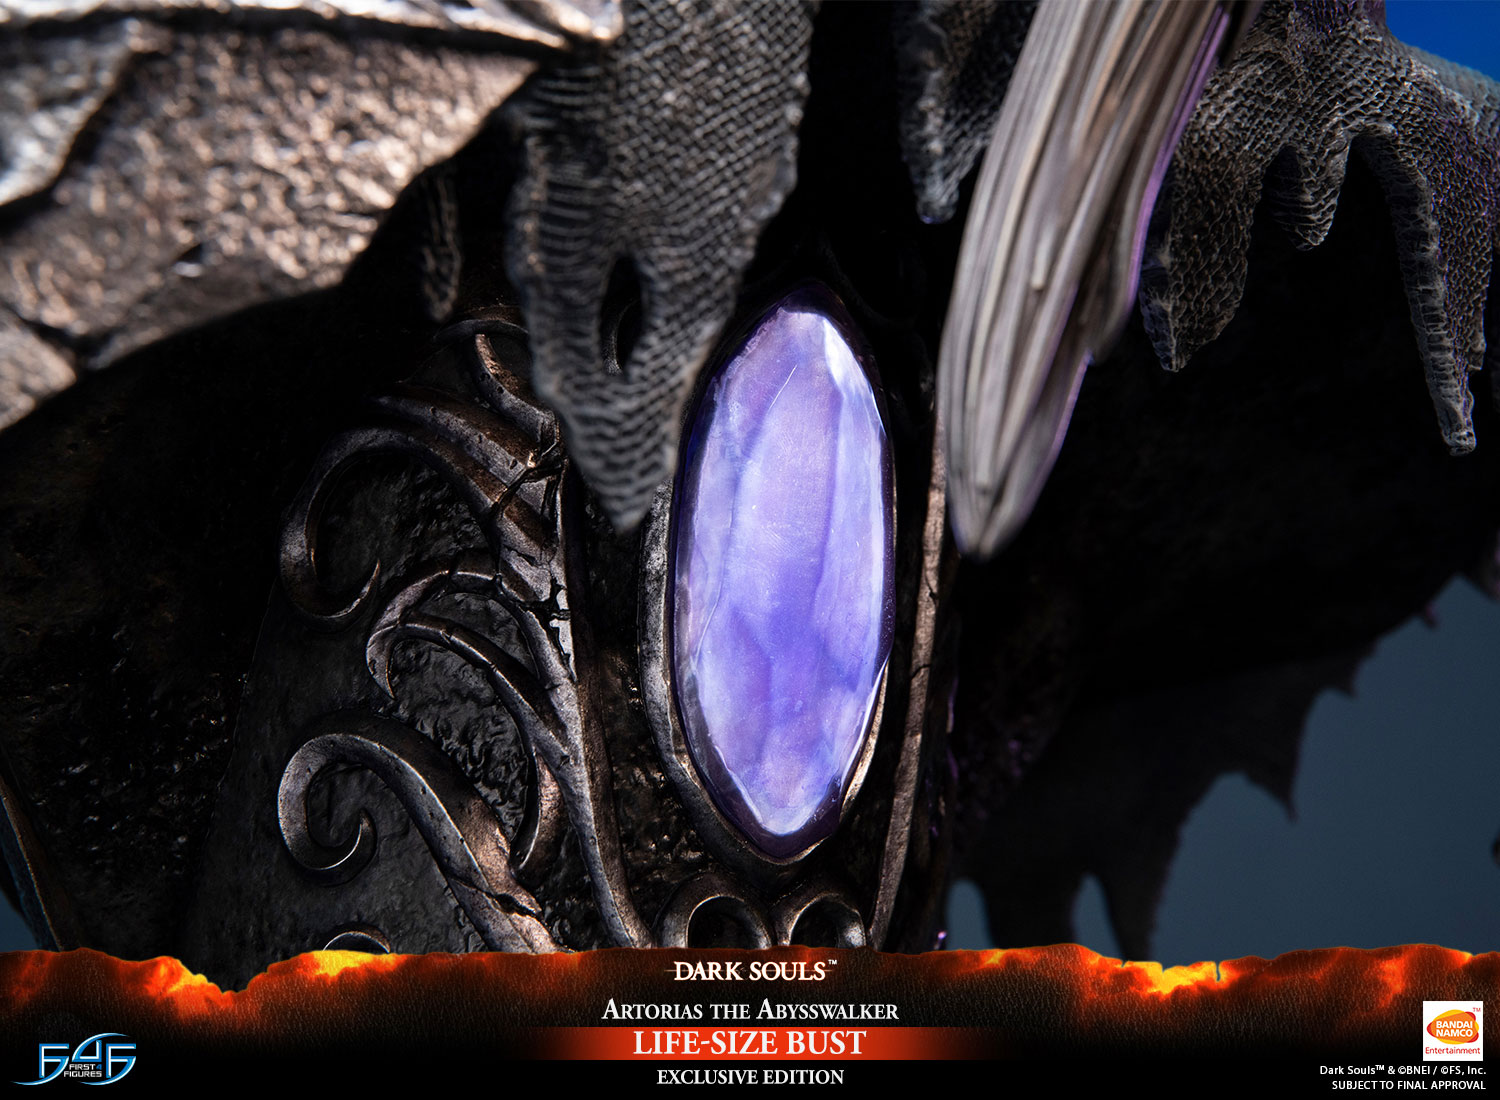 Artorias the Abysswalker Life-Size Bust (Exclusive Edition)